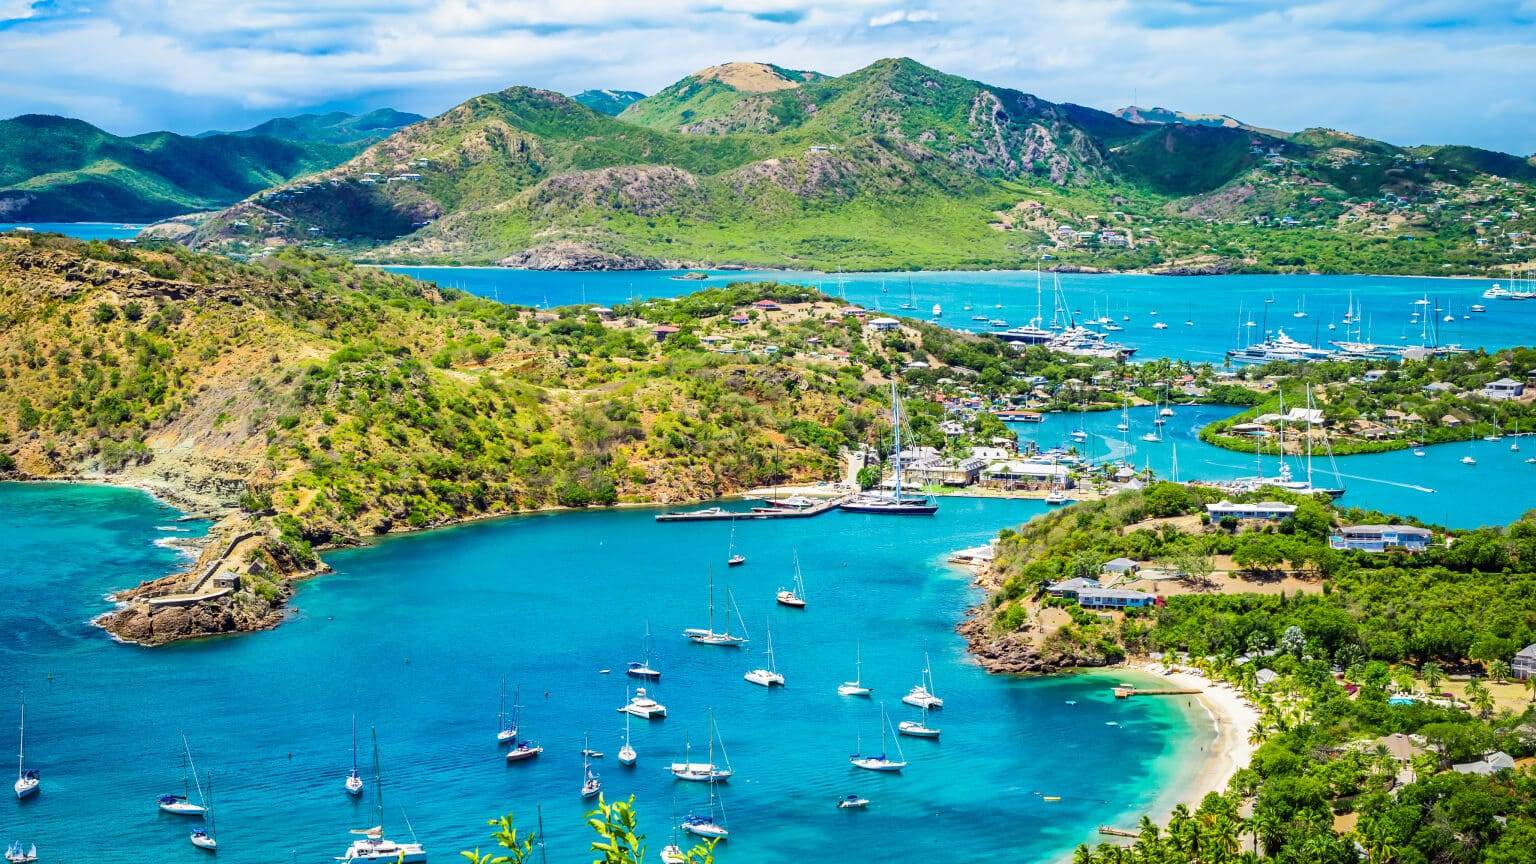 The island of Antigua in the Caribbean